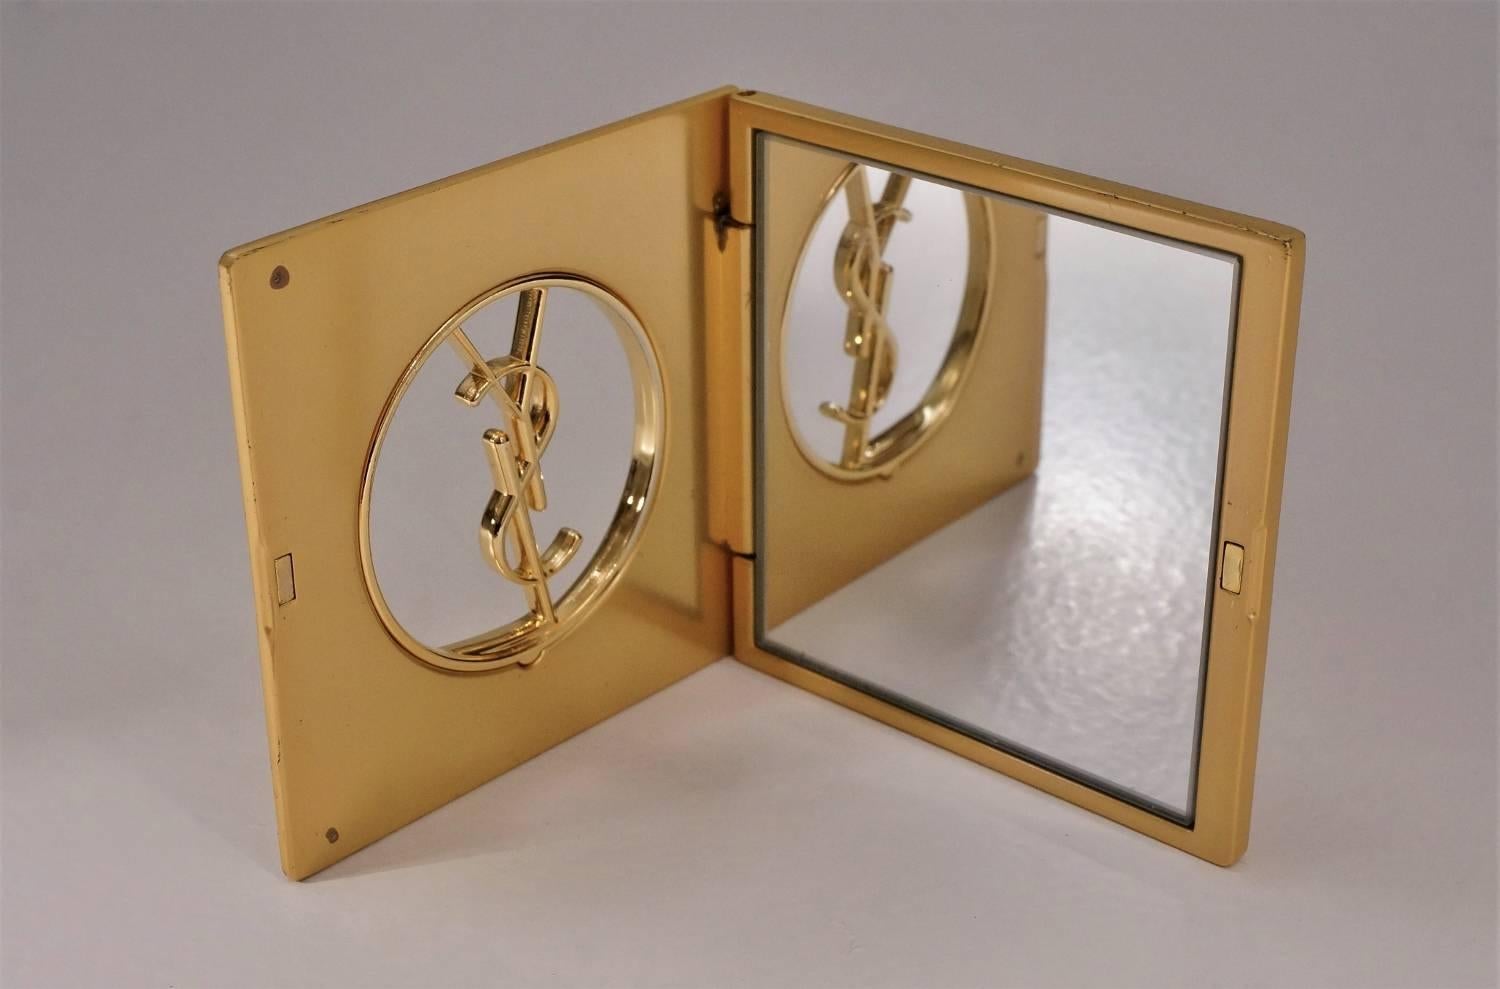 ysl mirror compact